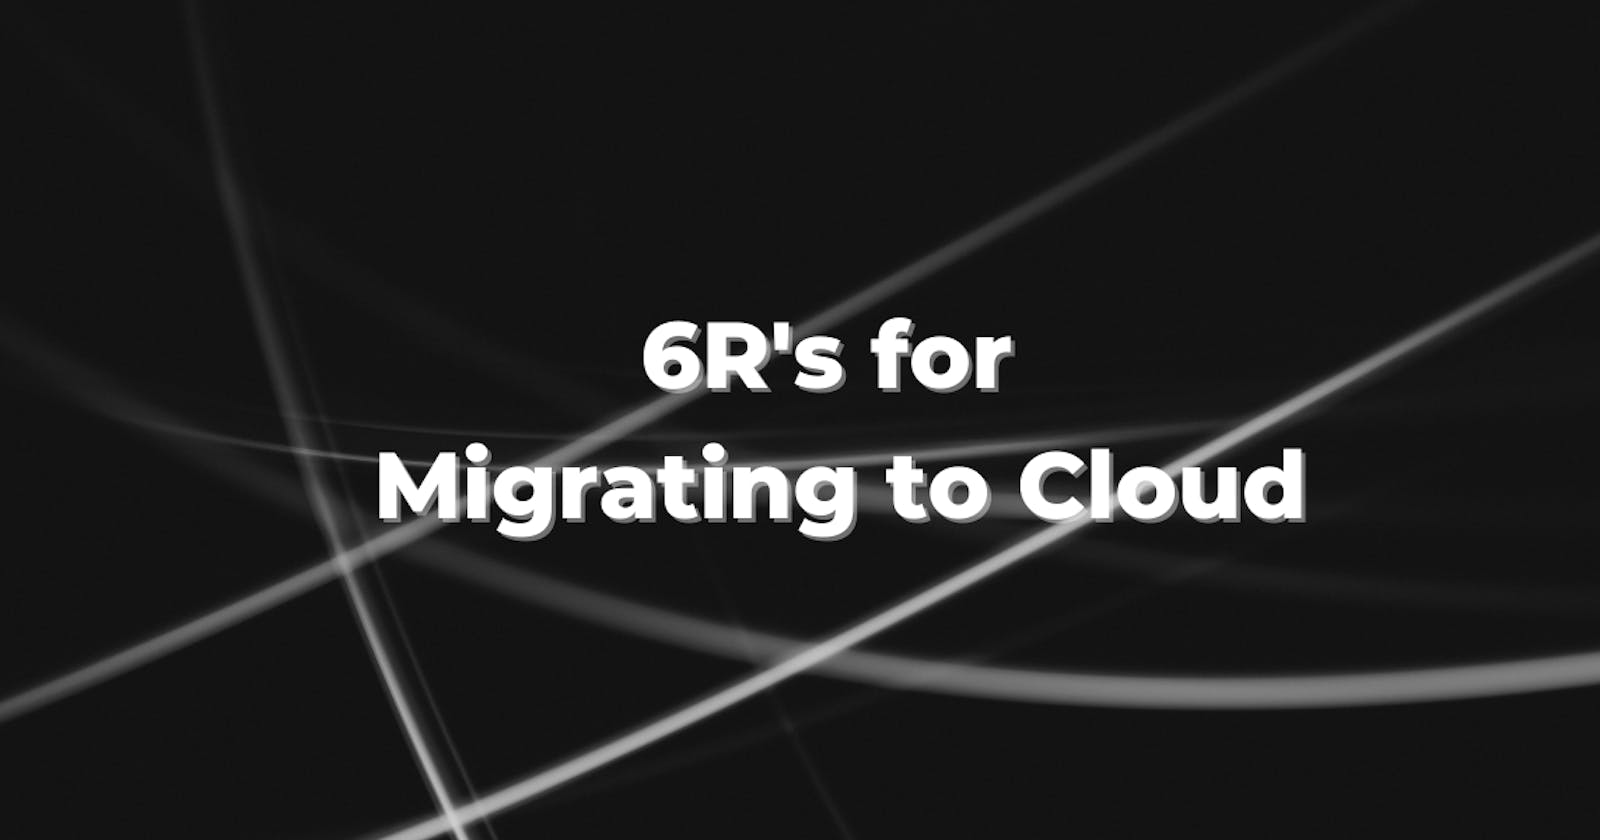 The 6R's for Migrating to Cloud